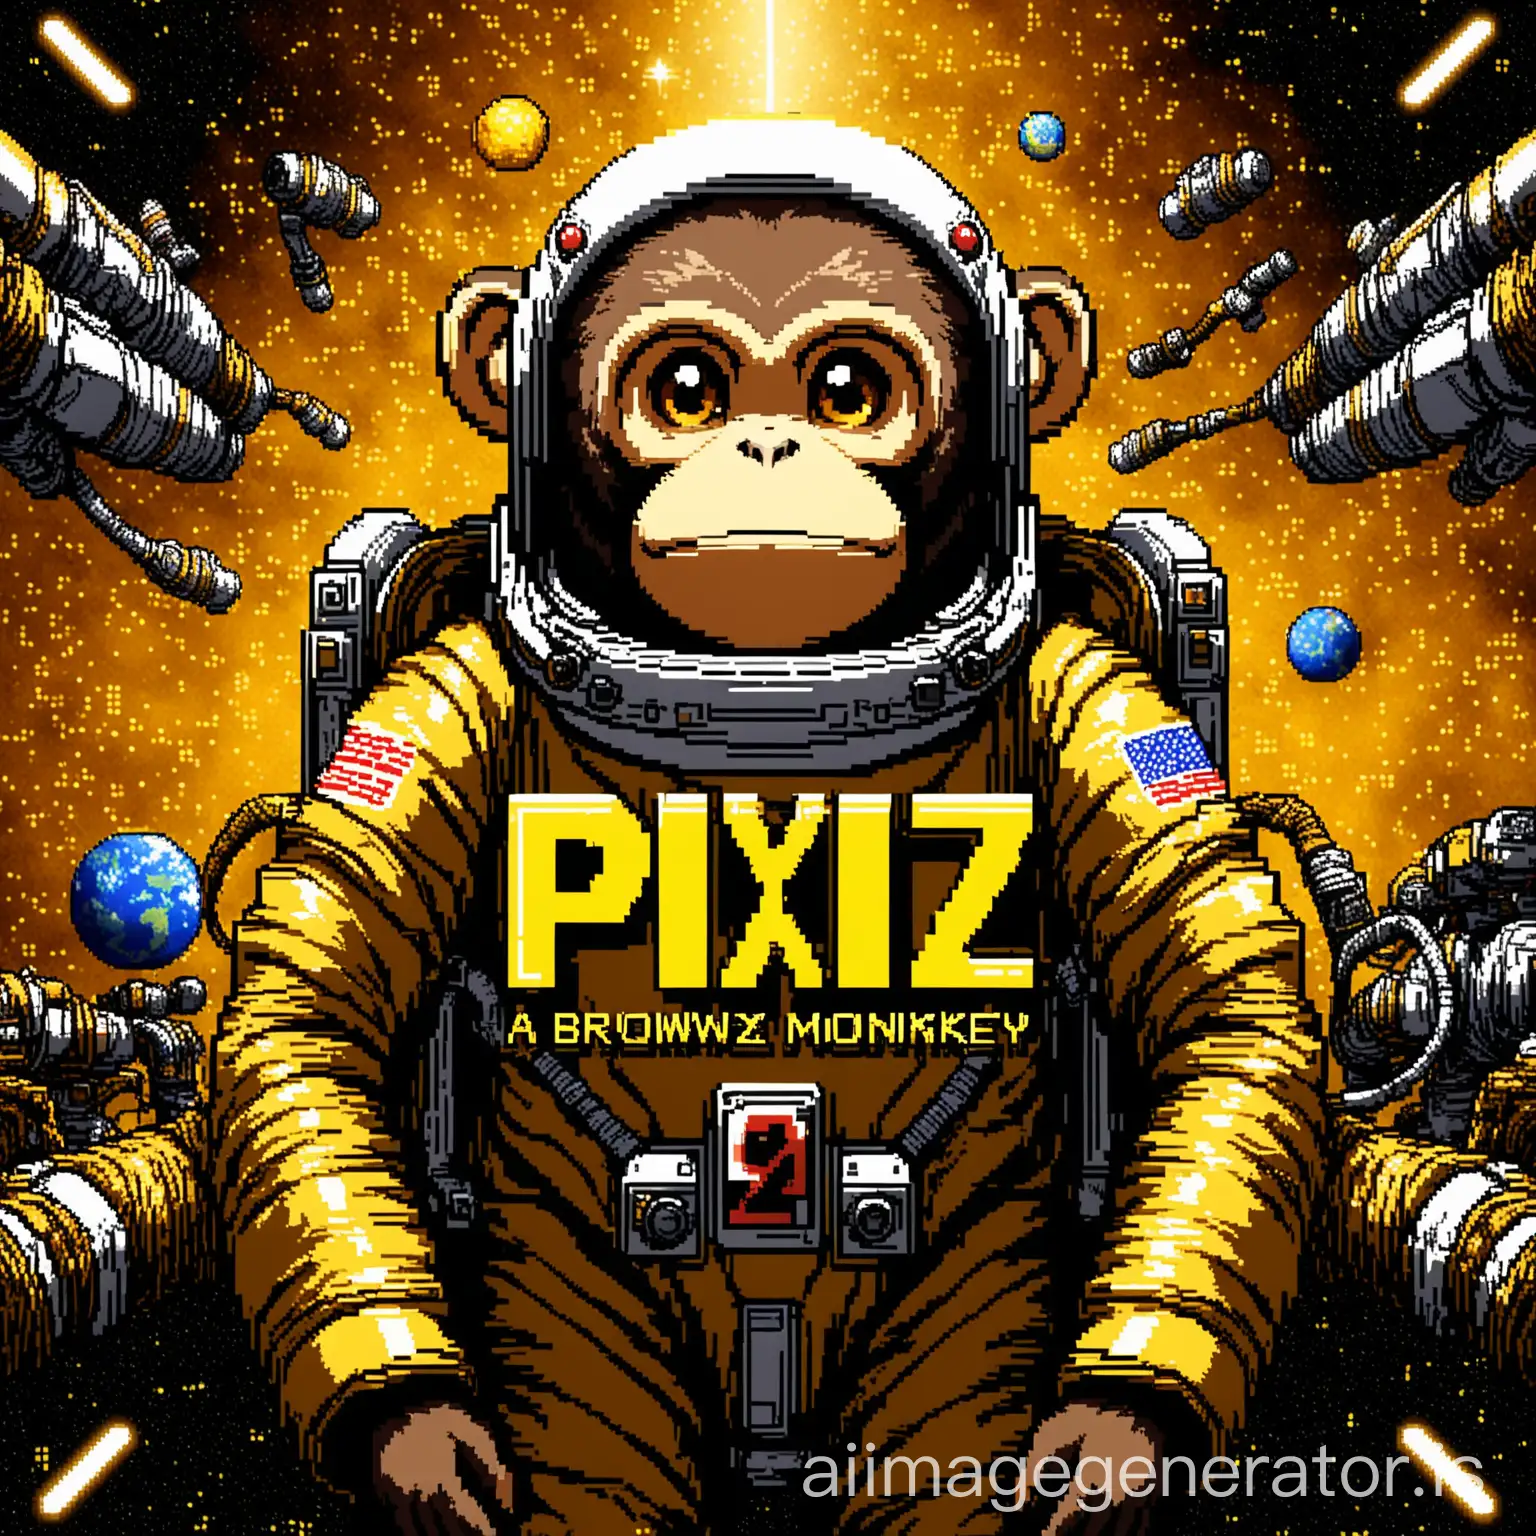 a brown pixel monkey in yellow space with spacesuit
"PIXIZ " Text in background
details are so high quality and lighting with detailed details